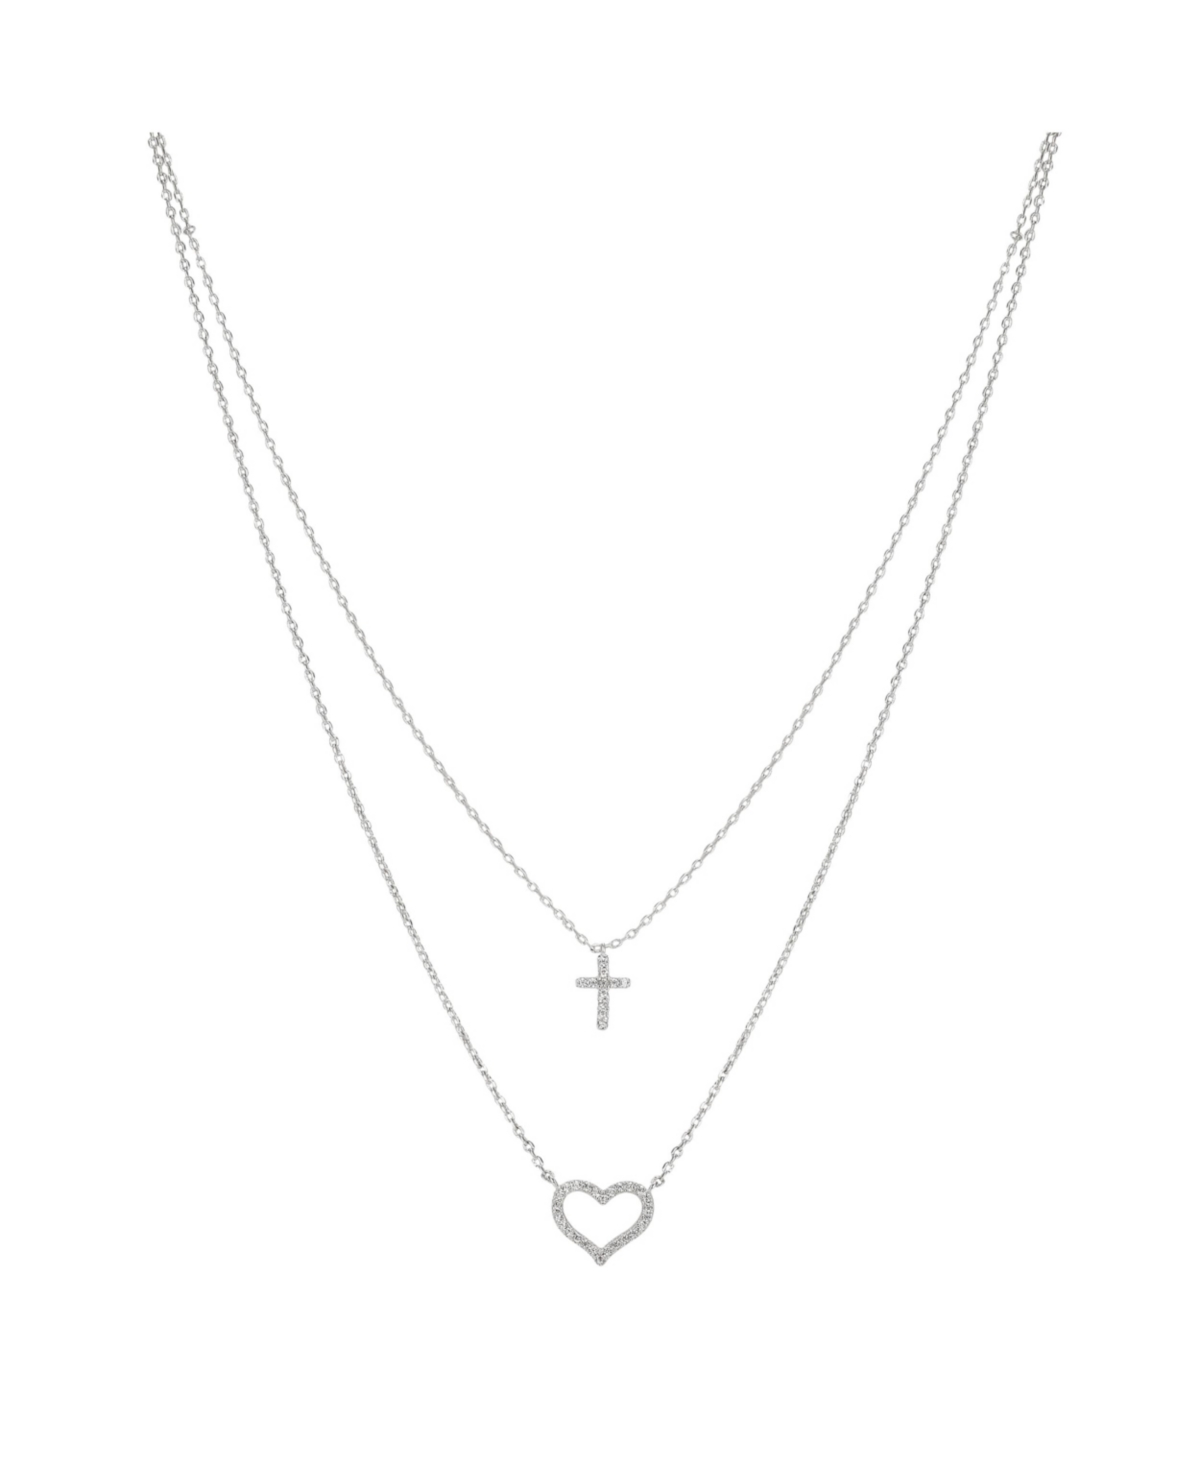 Fine Silver Plated Cubic Zirconia Cross and Heart Layered Pendant Necklace - Silver-tone